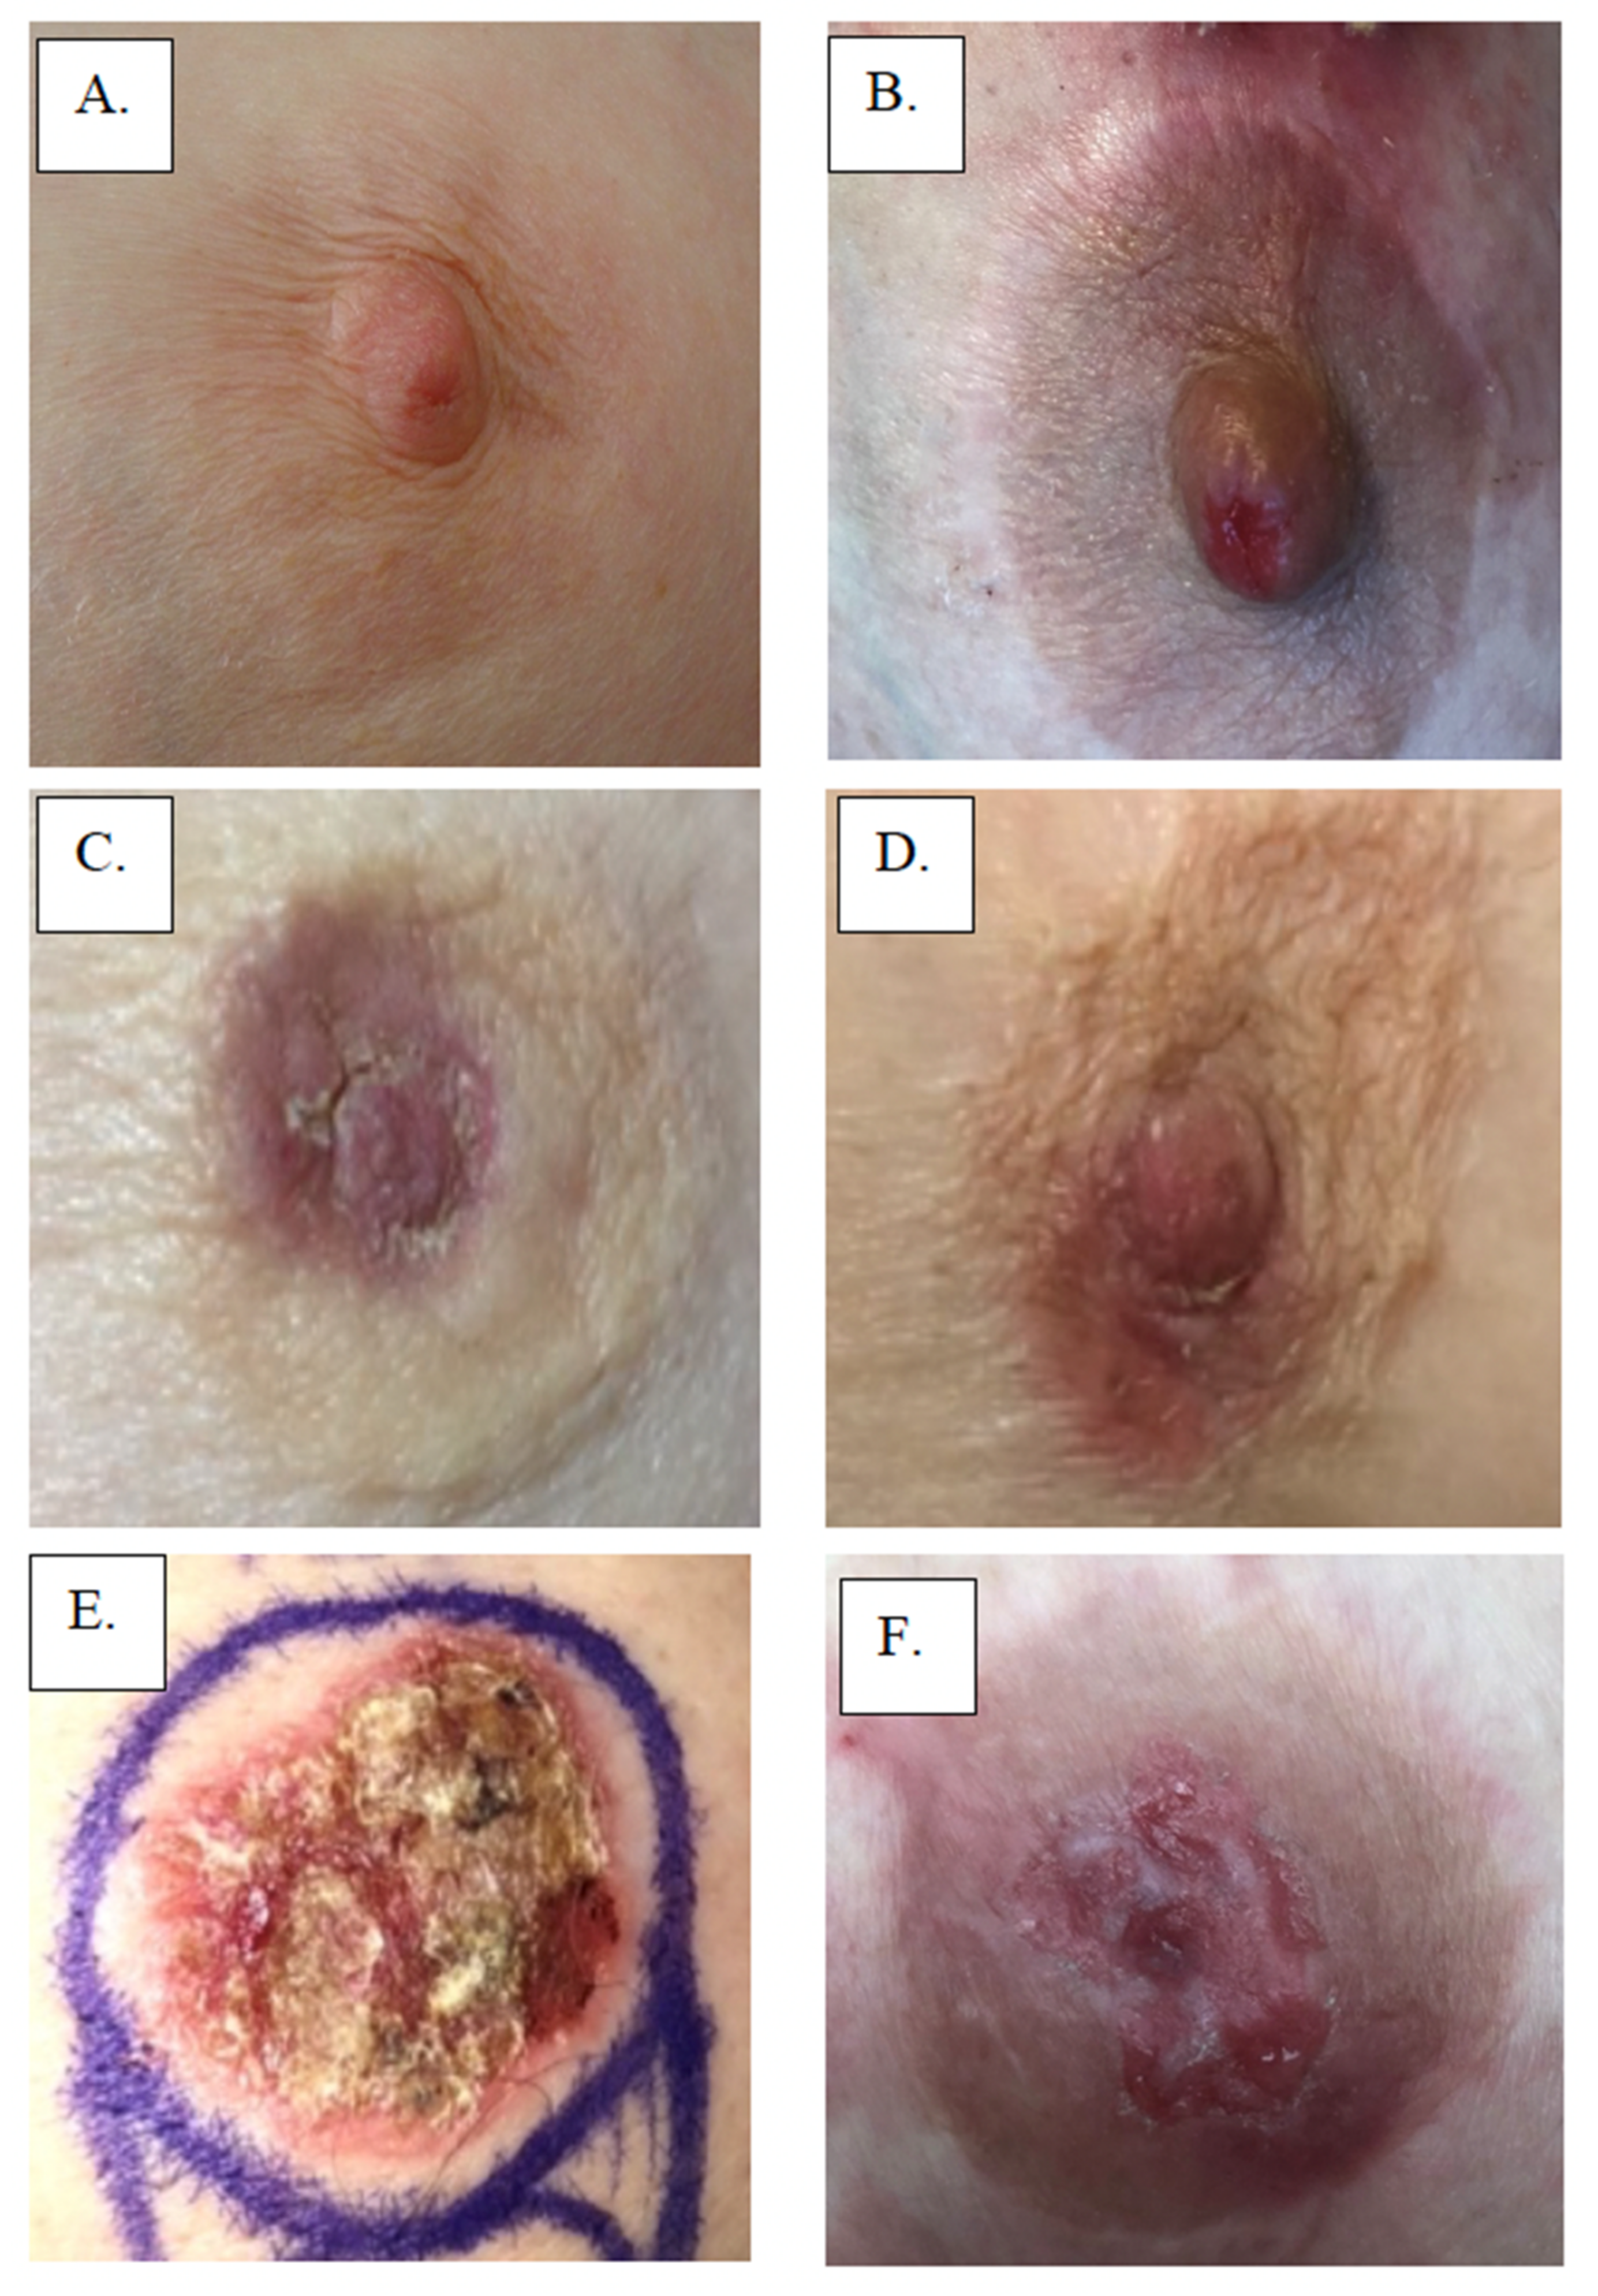 Itching & Rashes - Can It Be A Sign Breast Cancer? - By Dr